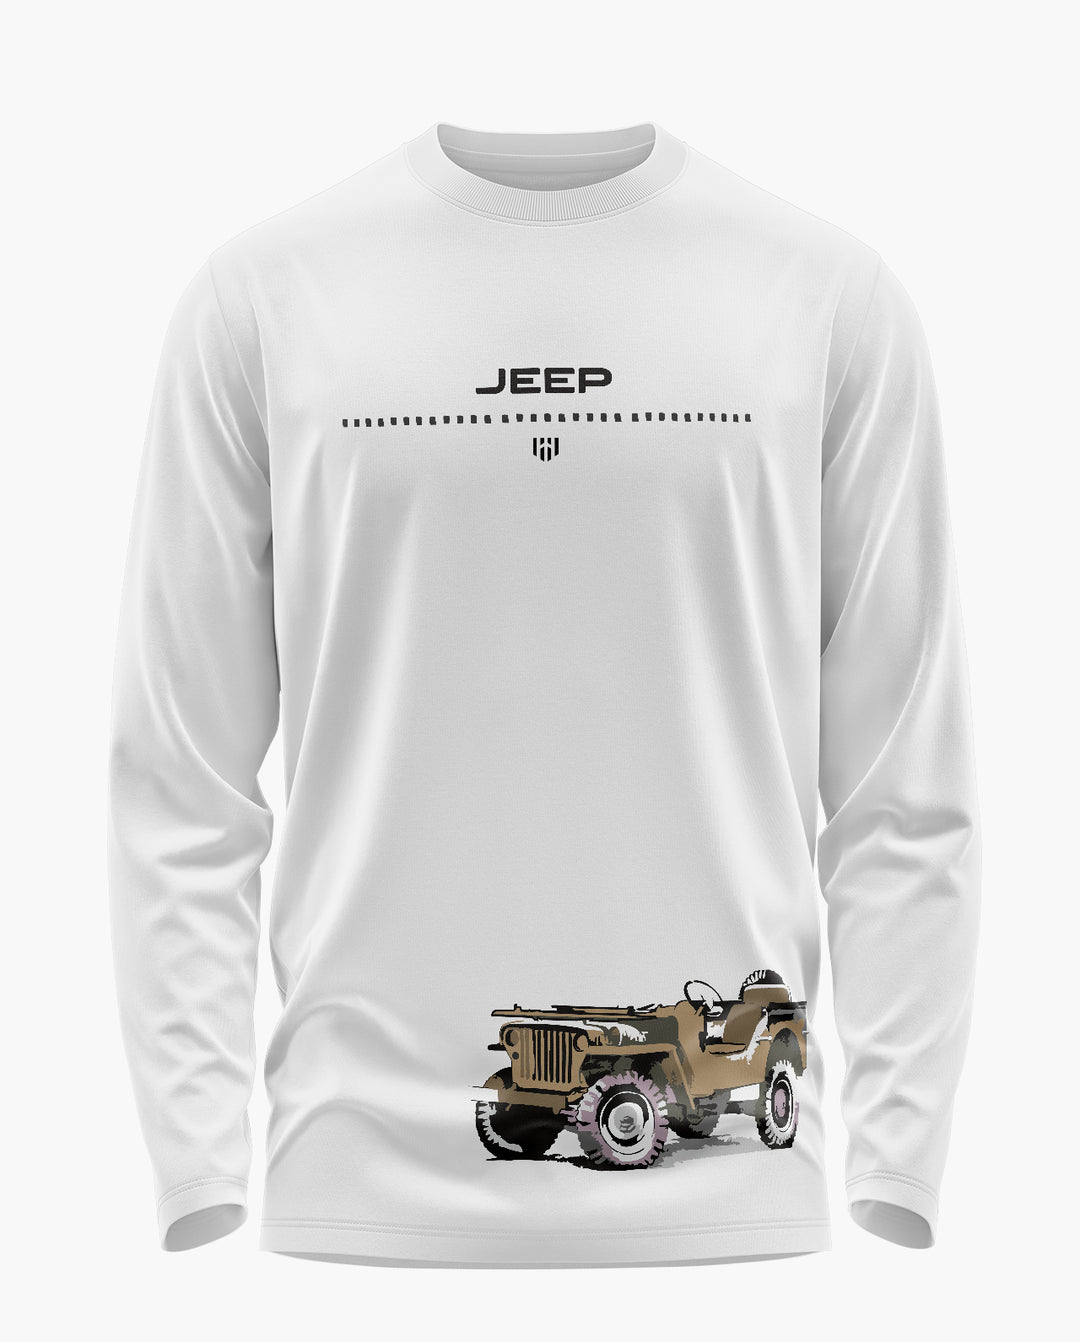 Willy's Jeep Full Sleeve T-Shirt